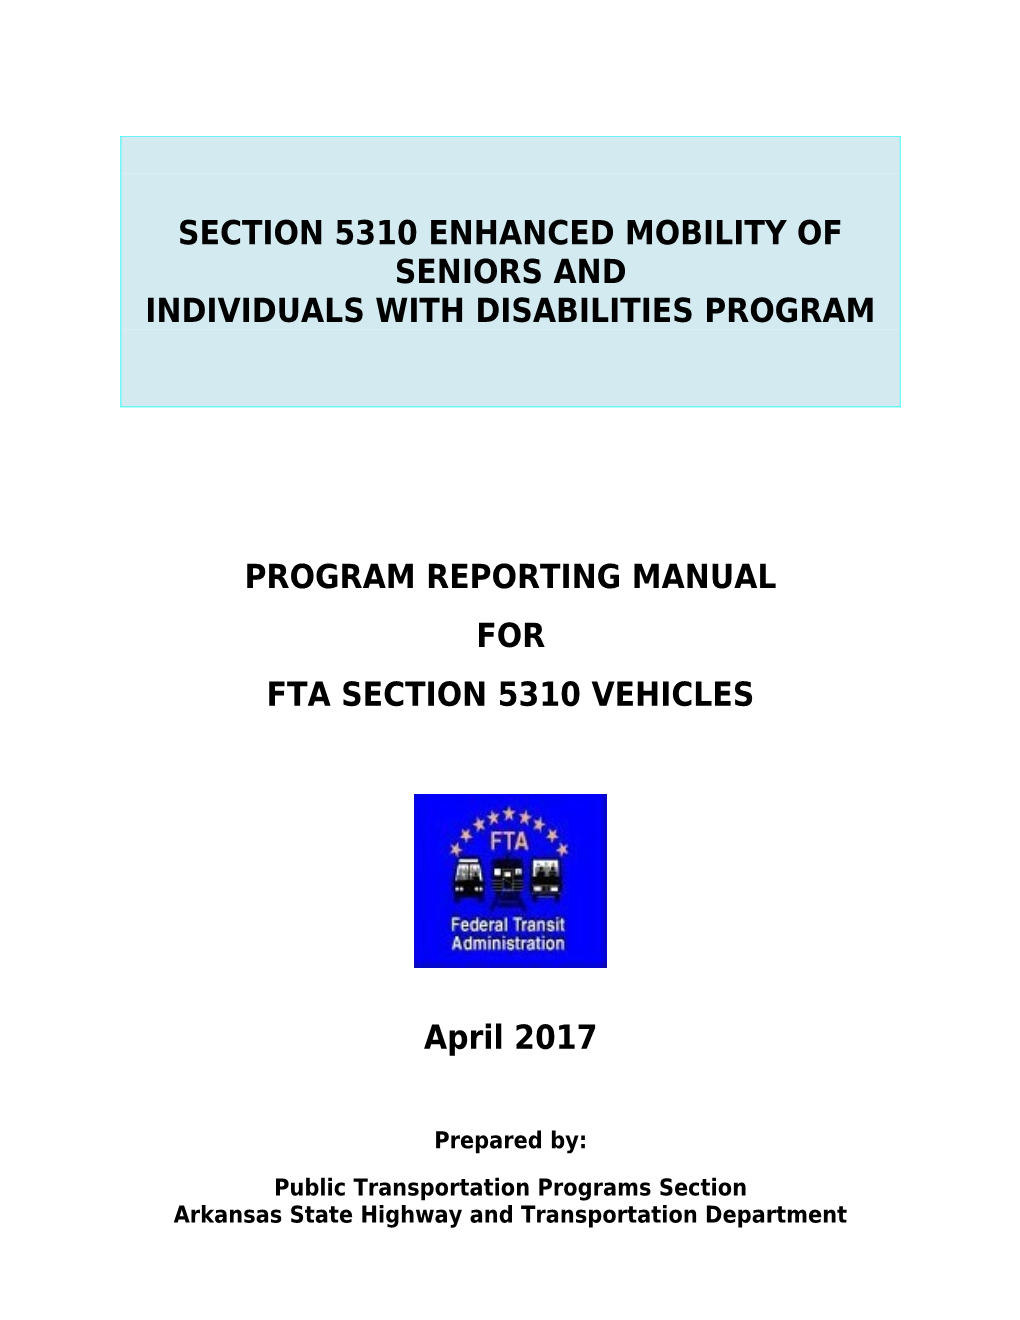 Individuals with Disabilities Program